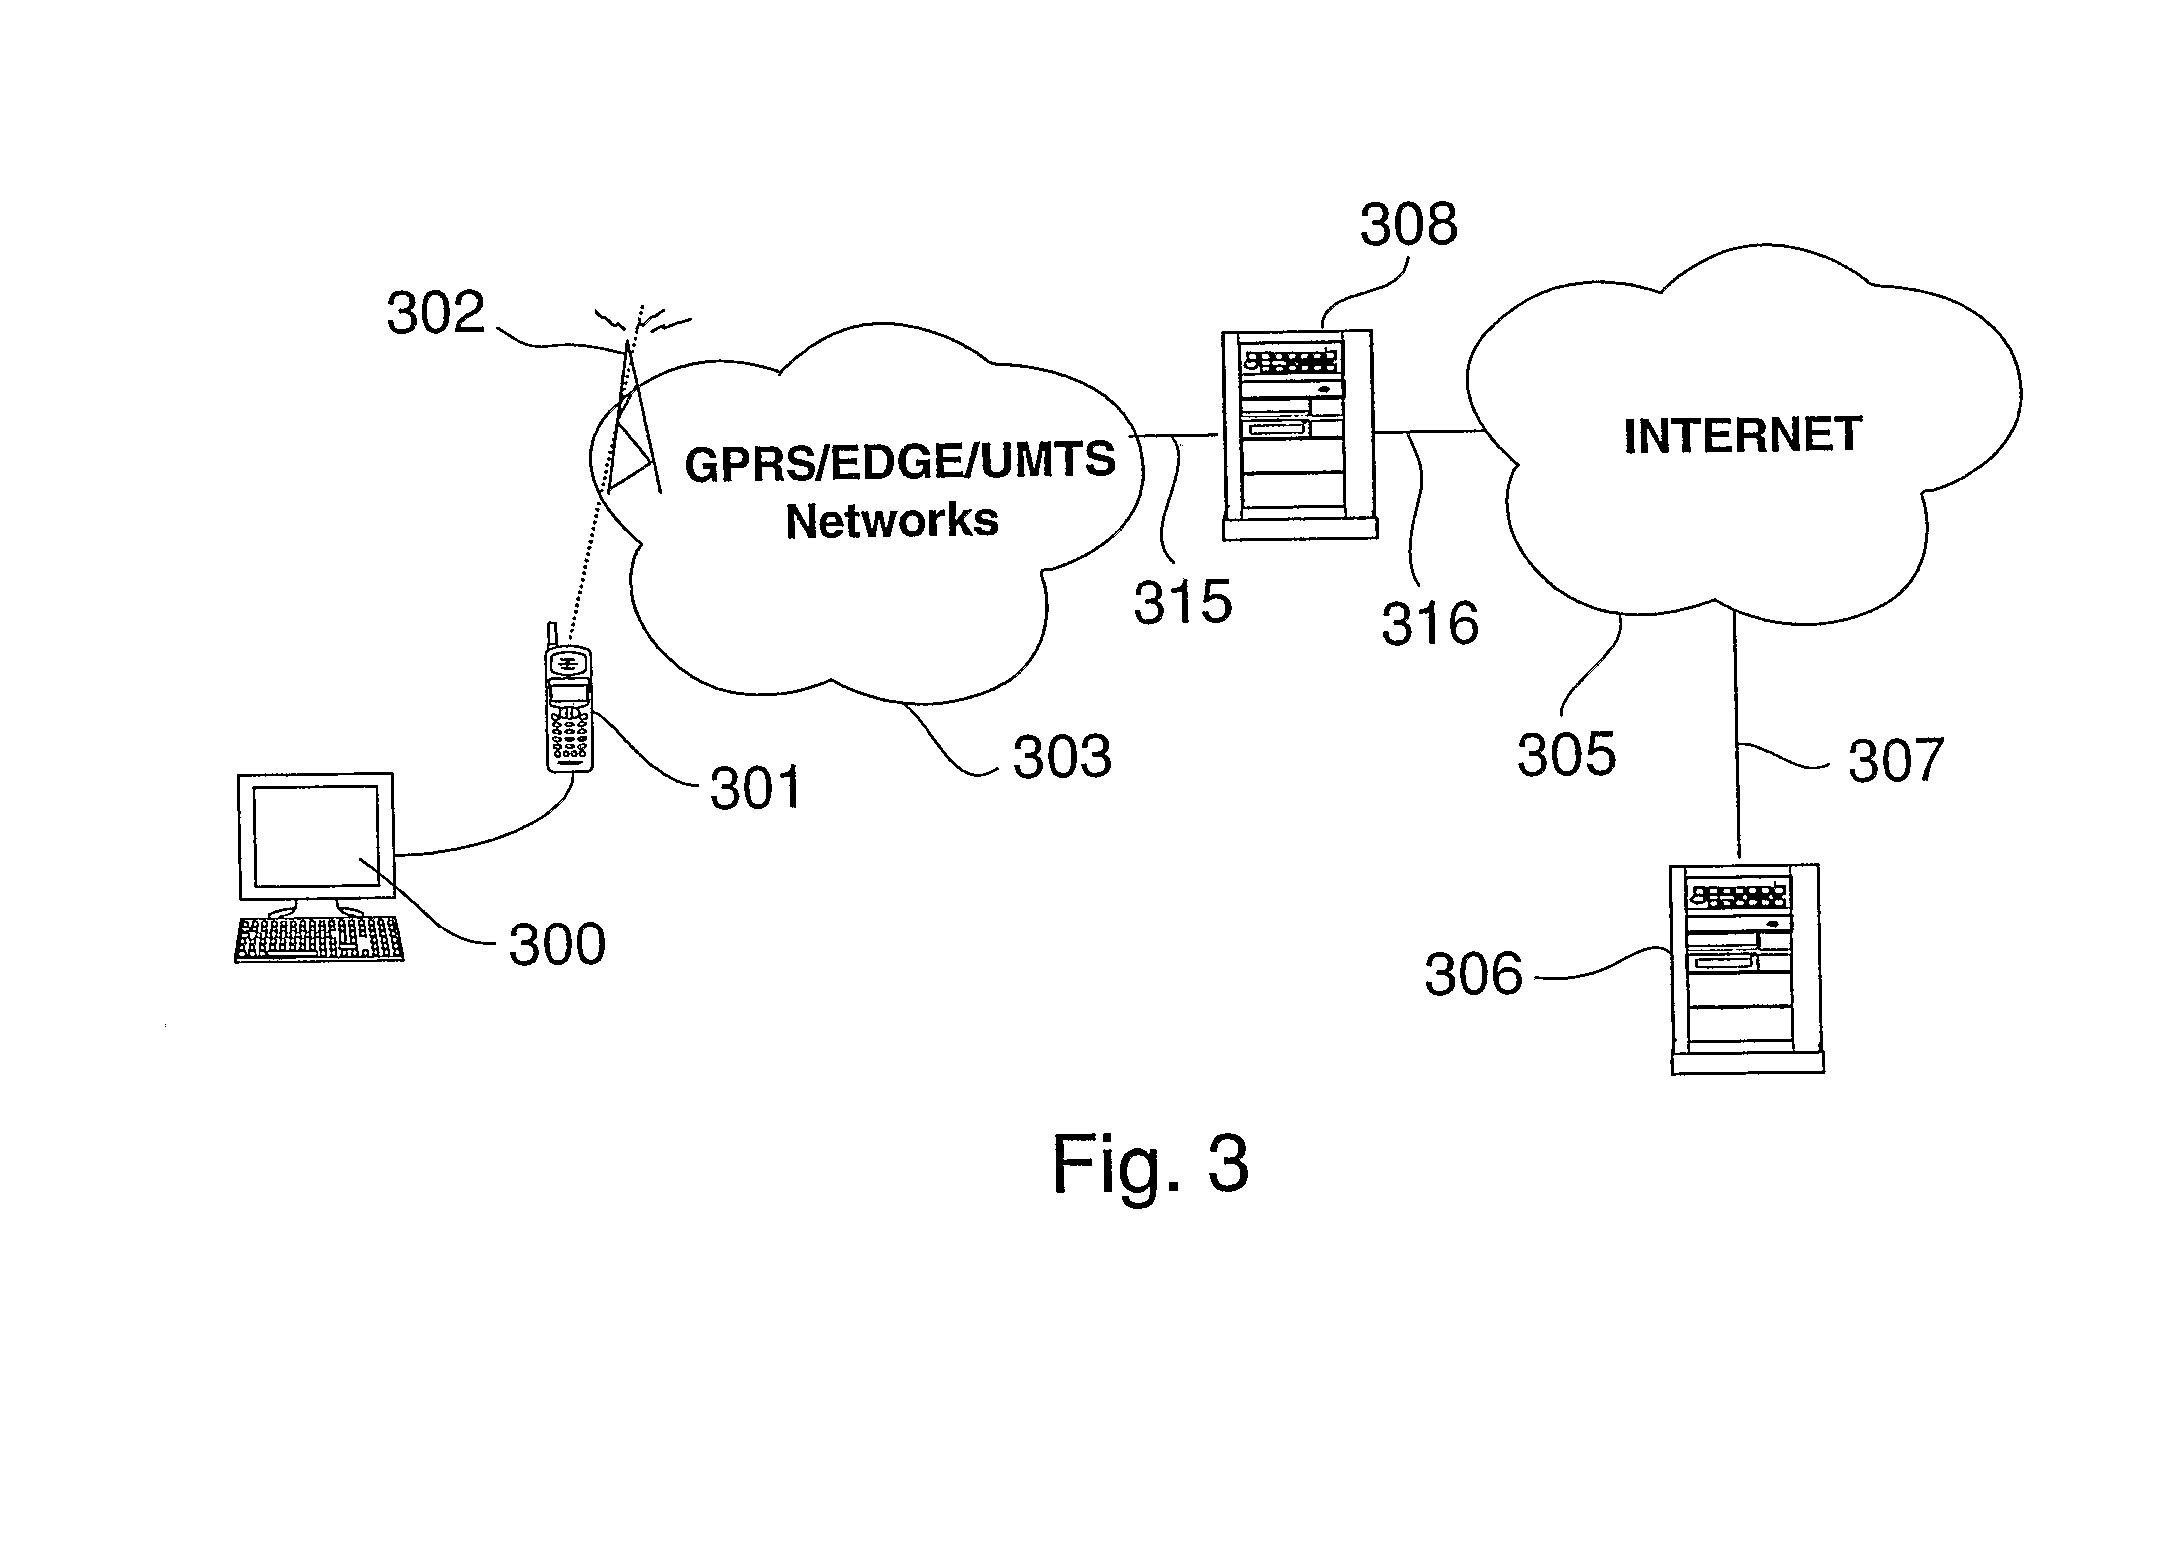 Method of Optimising Web Page Access in Wireless Networks